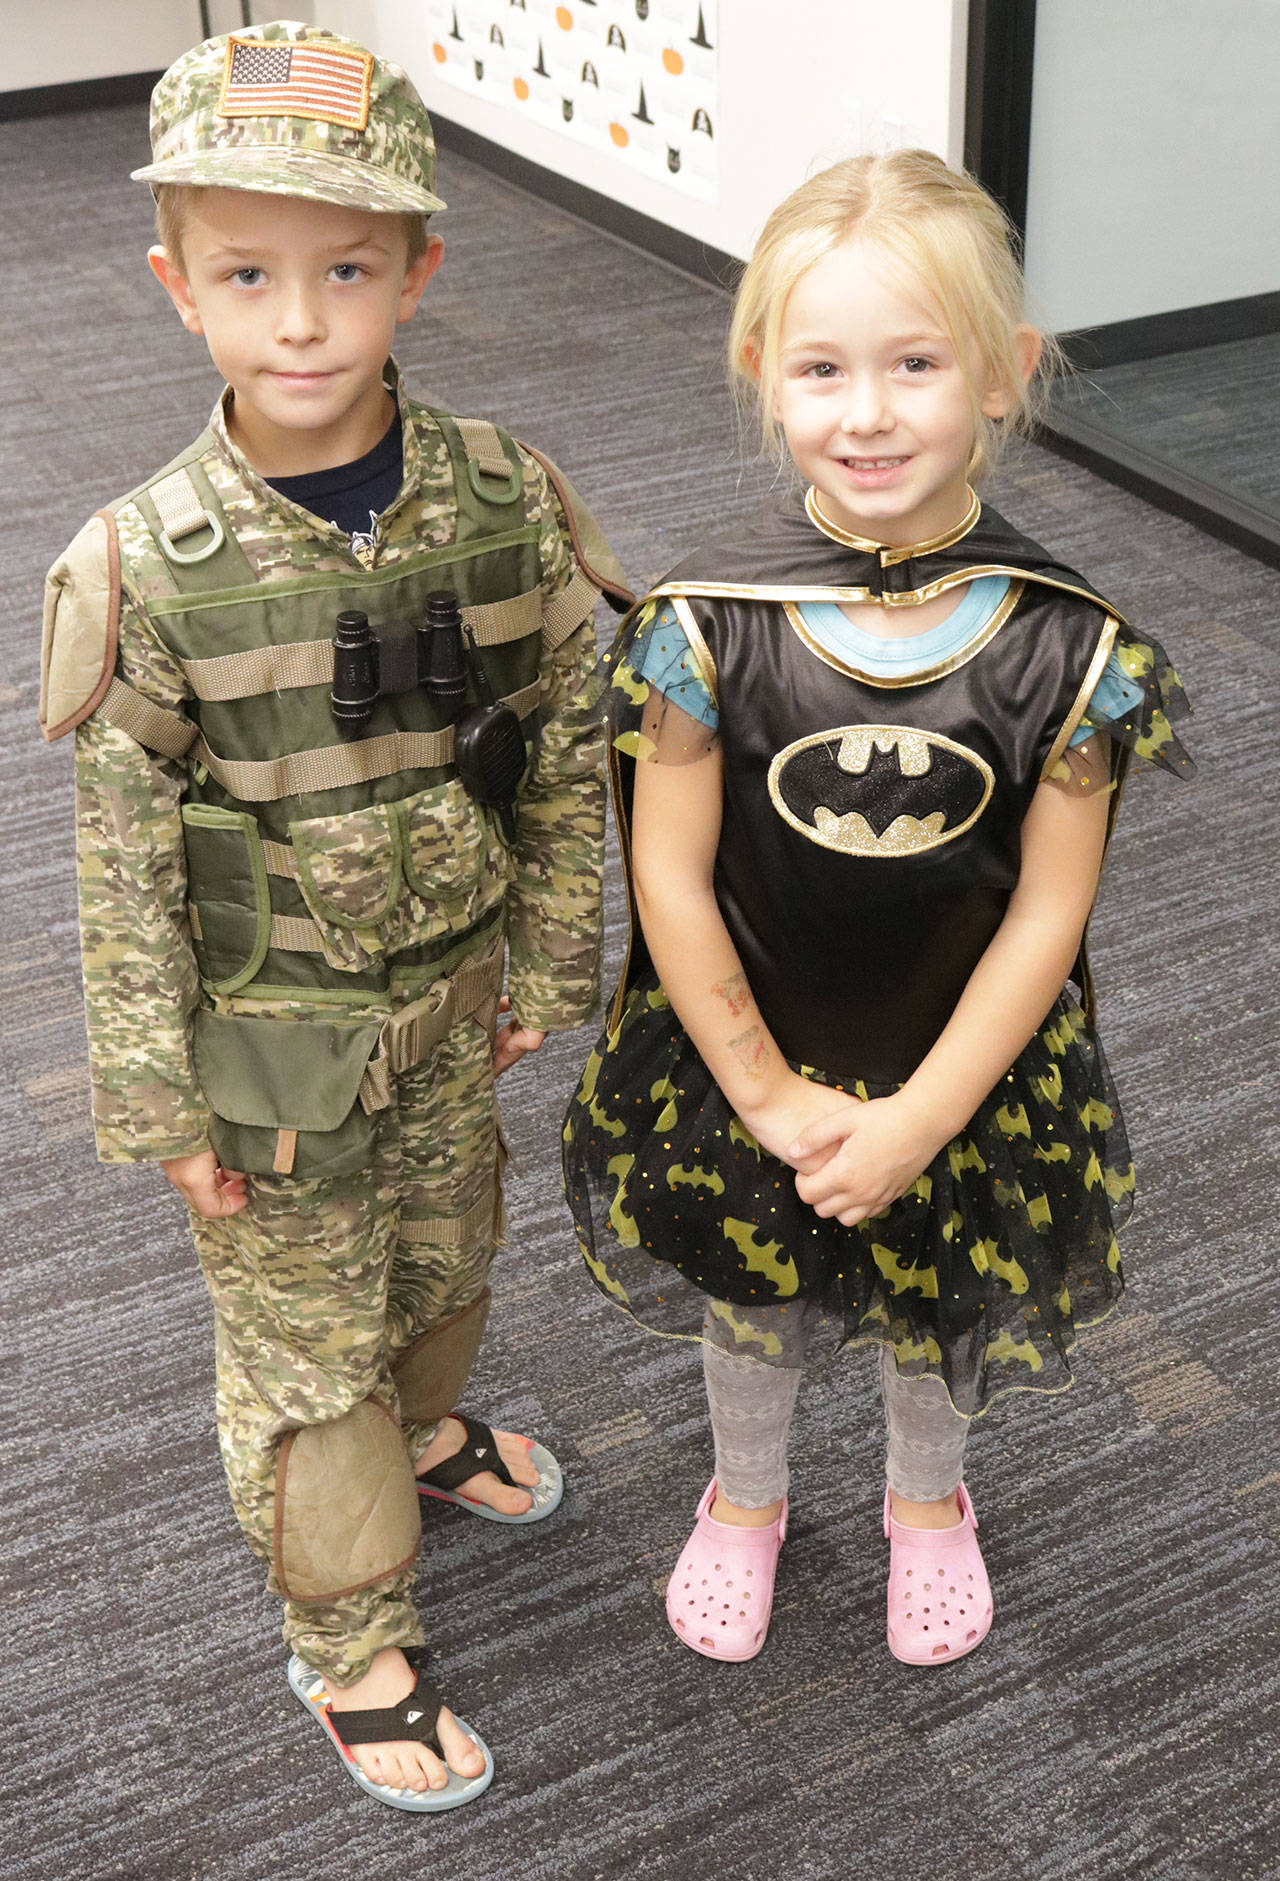 Austin Pilcher, 6, and his younger sister Sara, 4, show off their costumes during the City of Kirkland’s Halloween Costume Swap Saturday. Megan Campbell/Kirkland Reporter